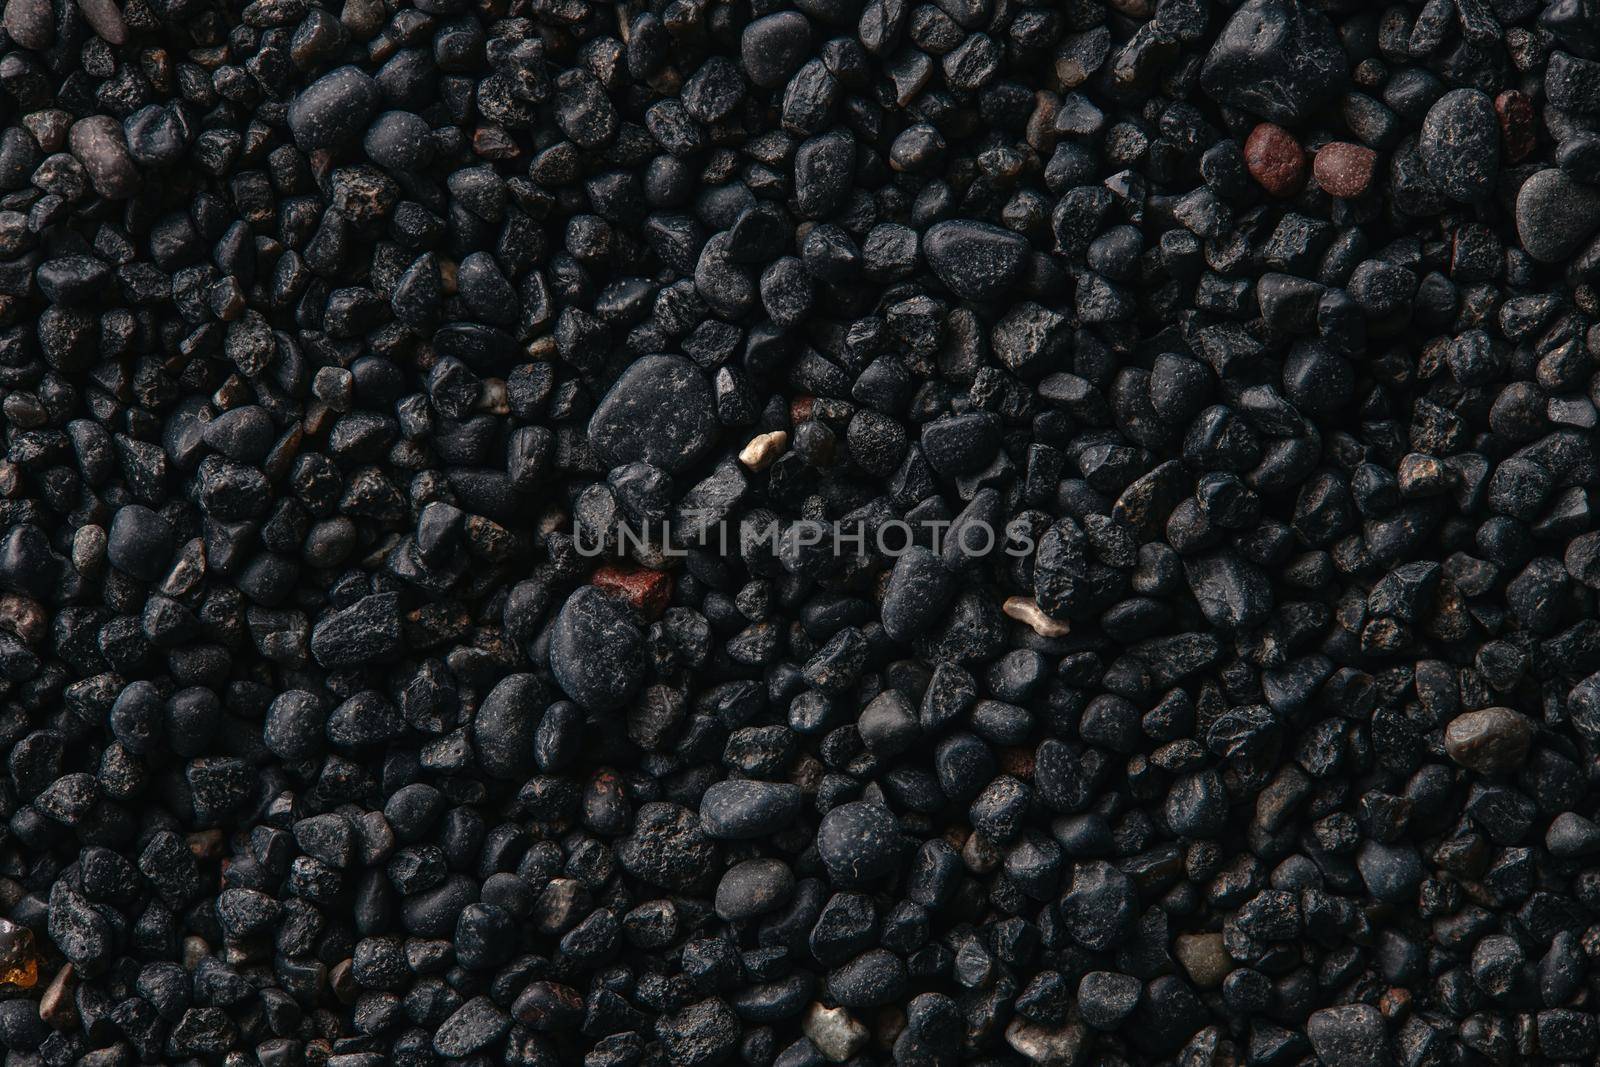 Texture of black volcanic sand for background. Black Sand beach macro photography. Close-up view of volcanic sand surface. Icelandic Black Sand macro photography. Black pebble background.